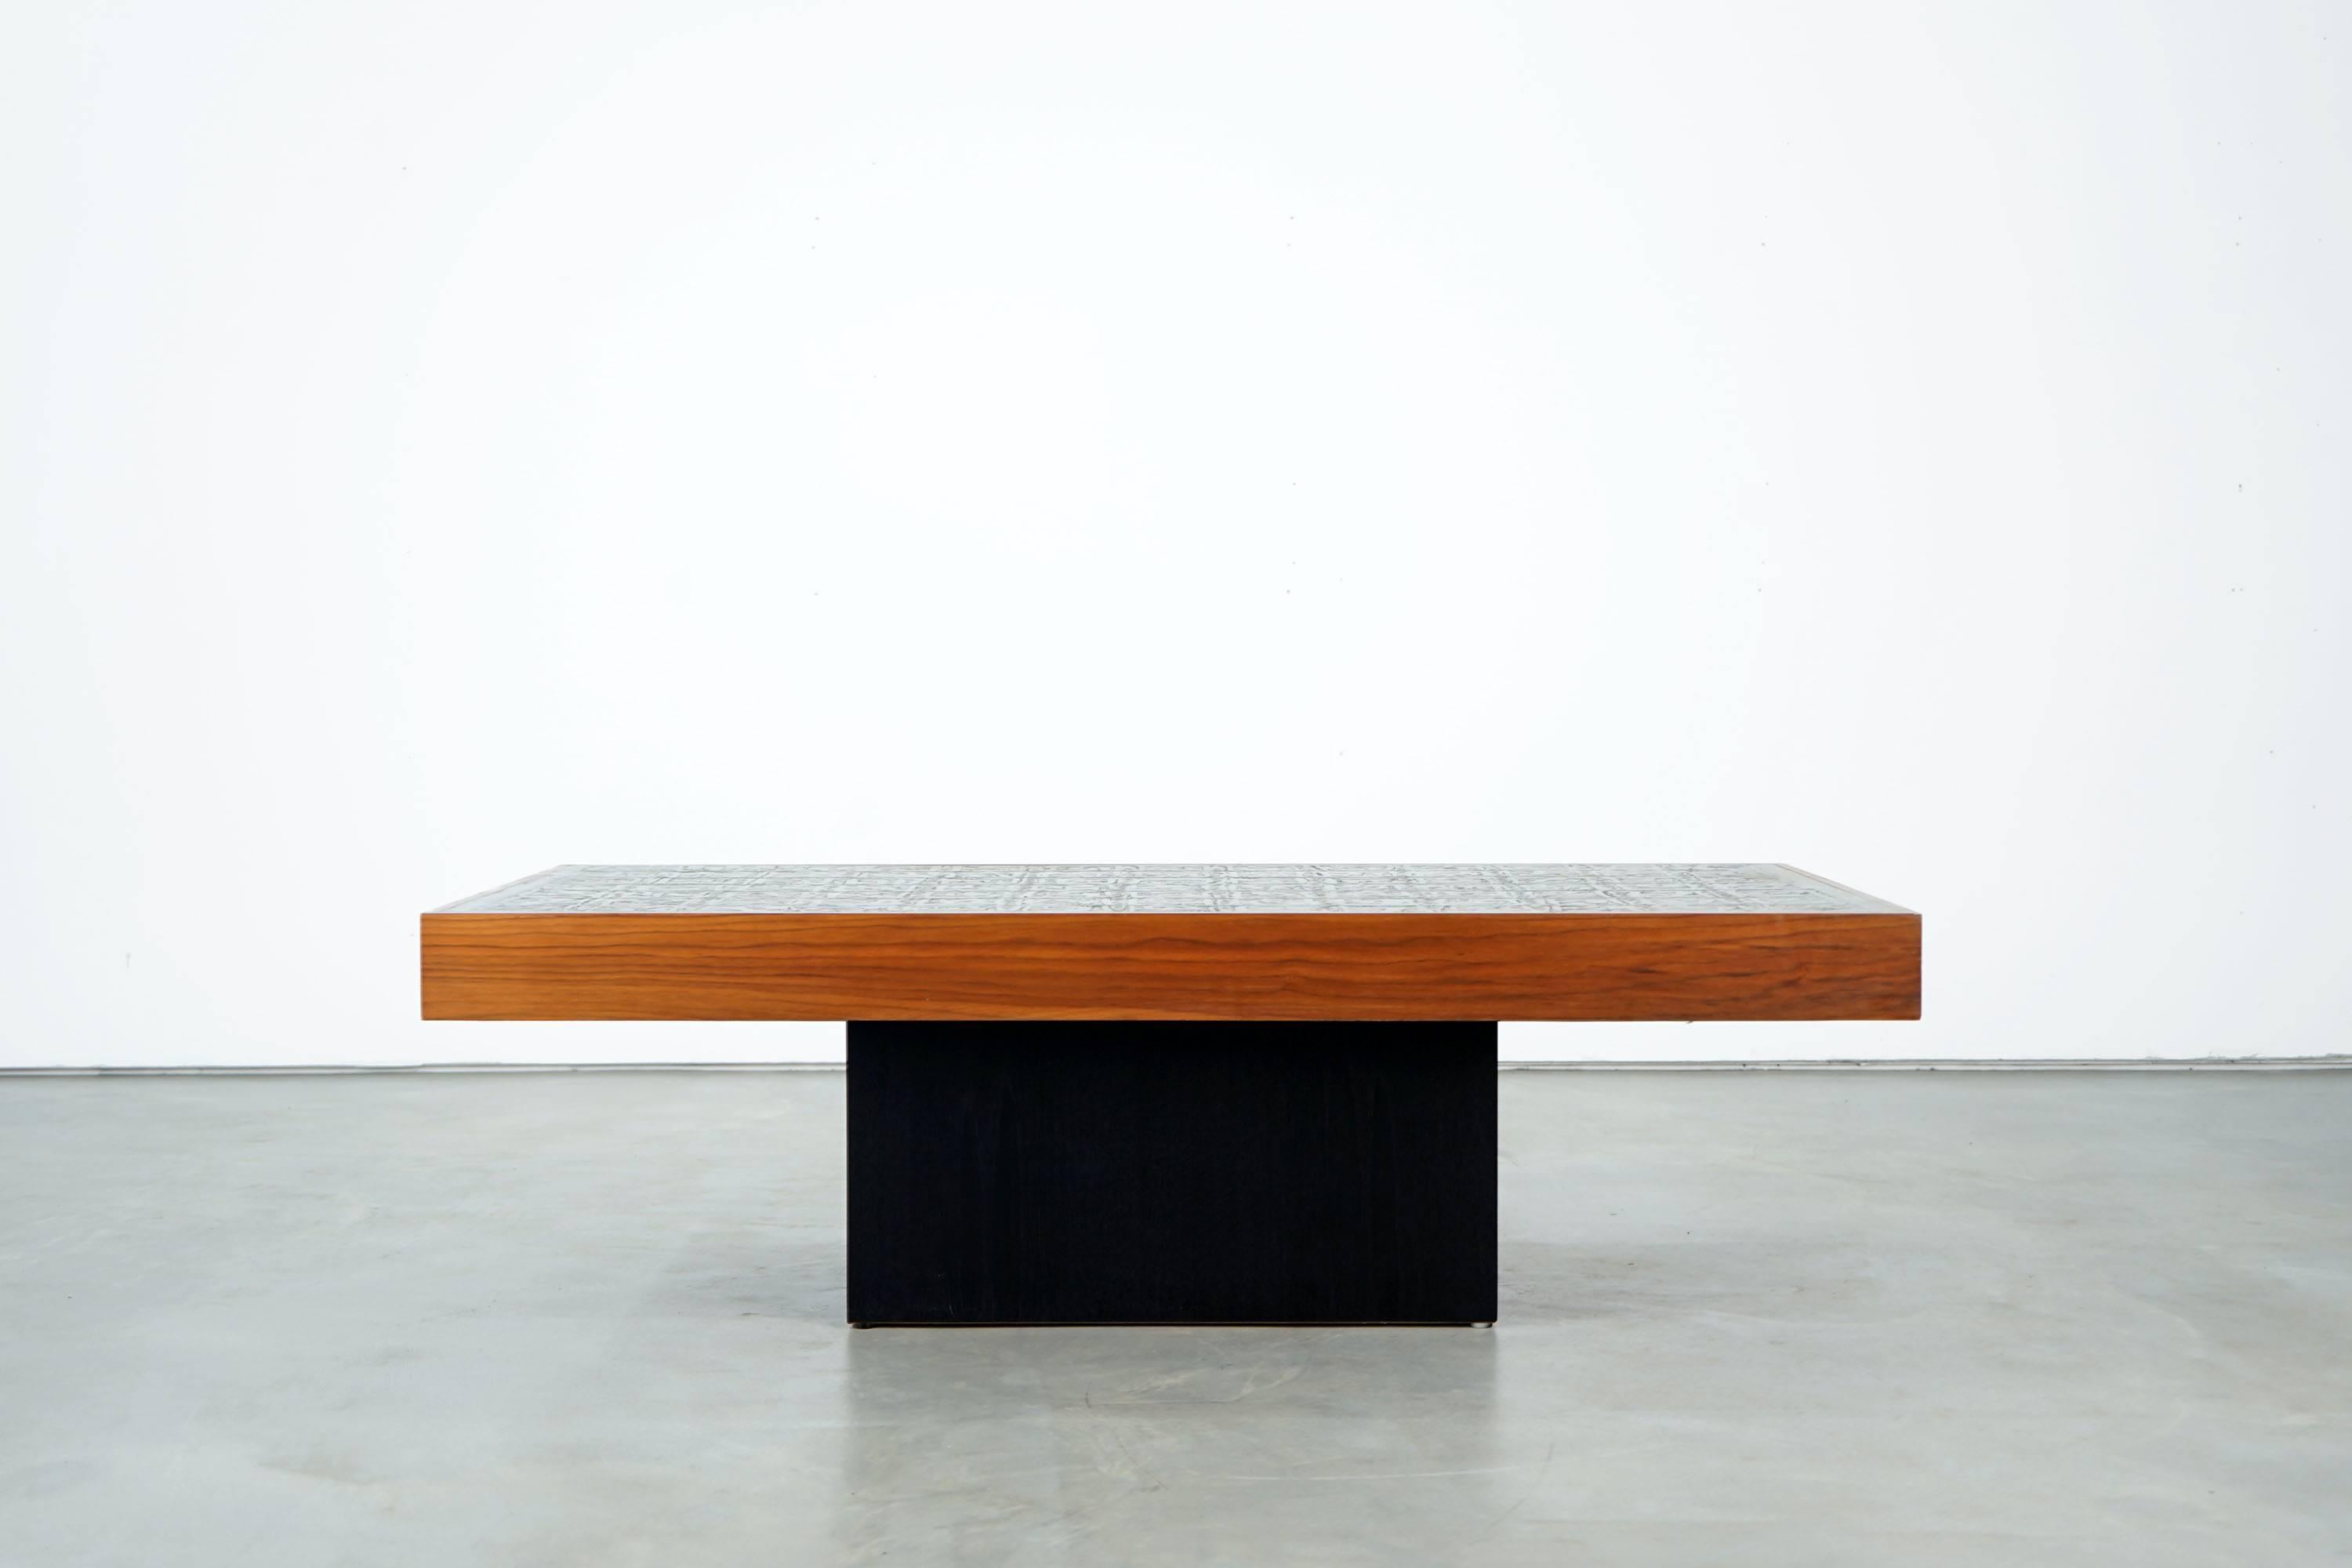 Decorative zinc sofa table with acid etching, designed, circa 1970 by Bernhard Rohne. The tabletop rests on a black wooden frame. The object is in a very good condition.